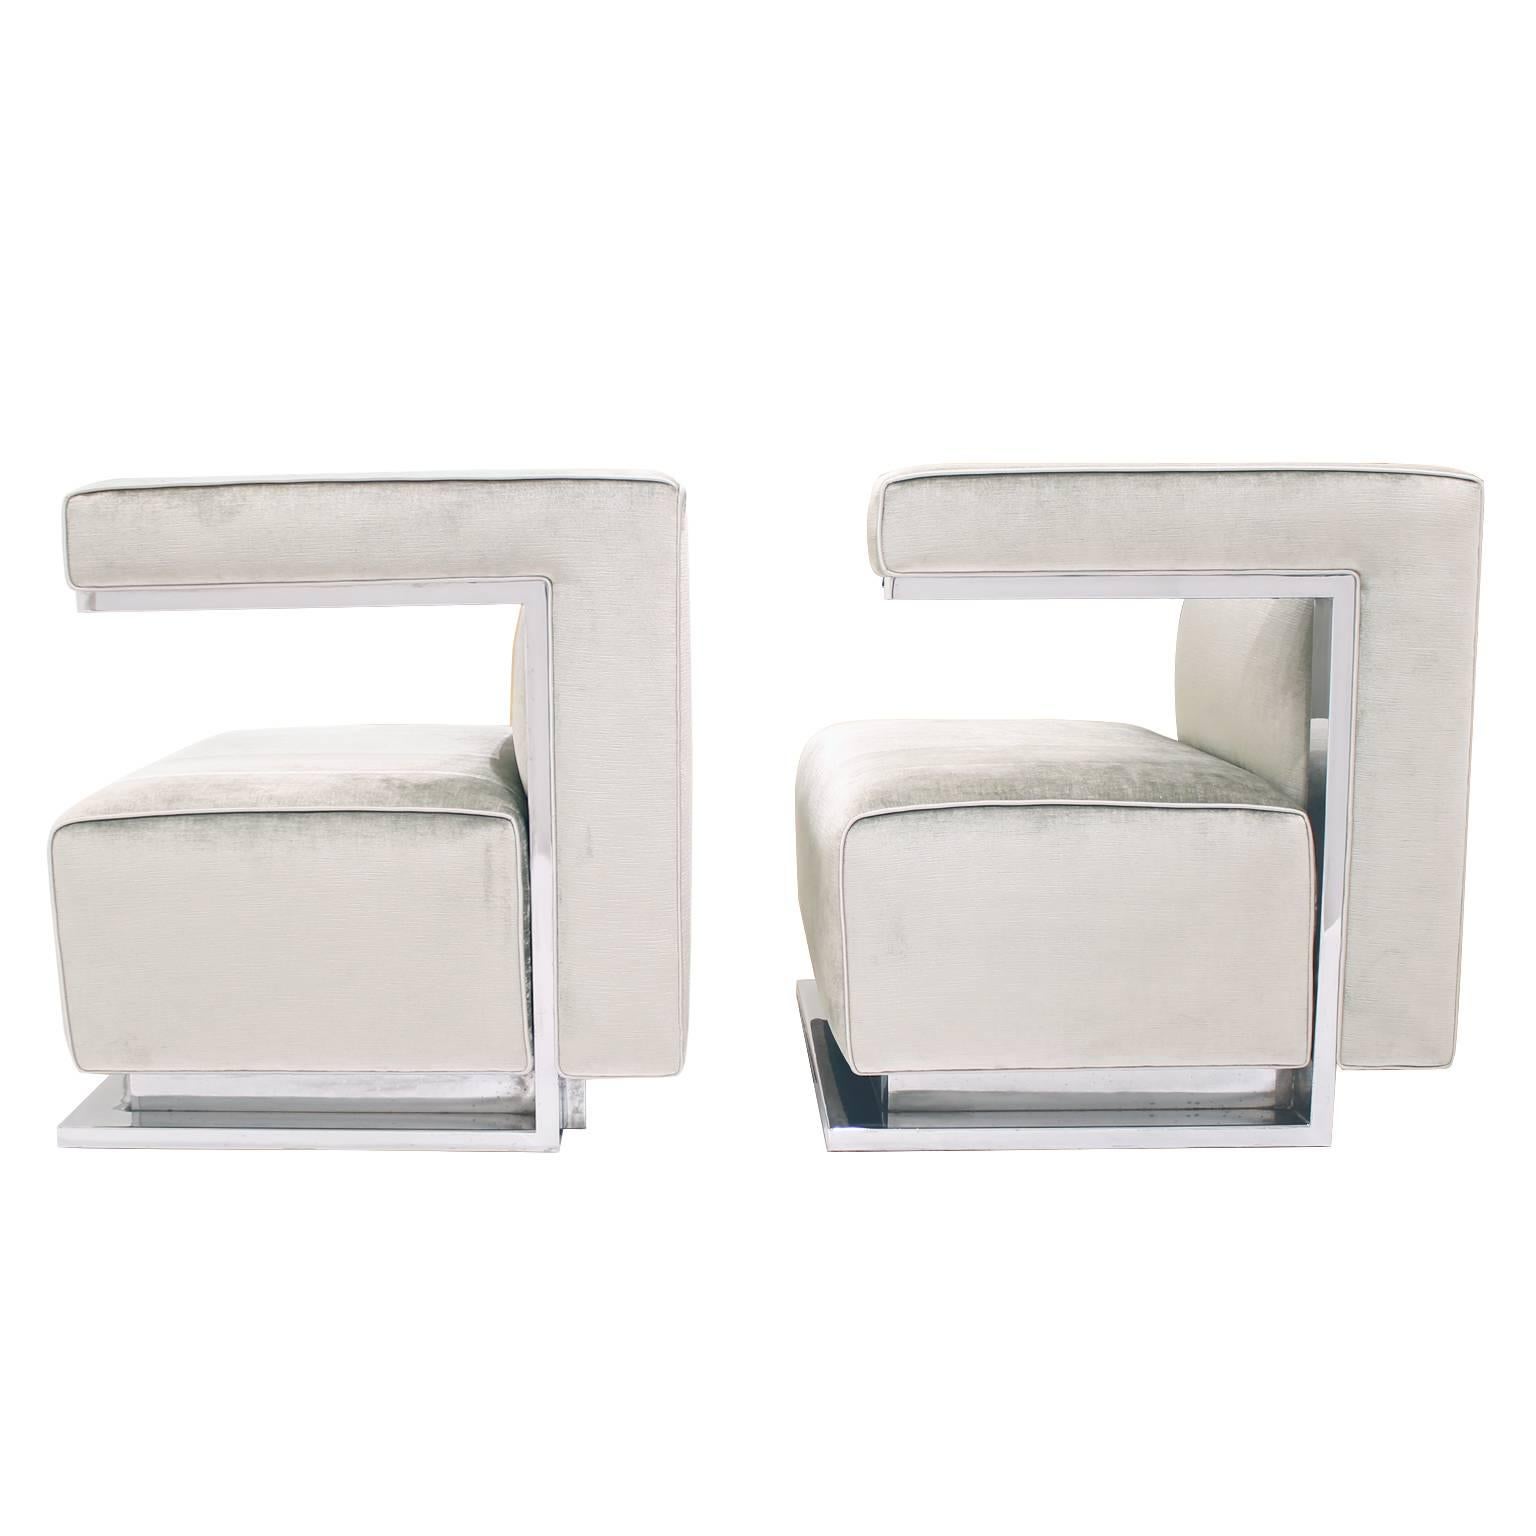 Walter Gropius Cubist Steel and Chrome Armchairs In Excellent Condition For Sale In New York, NY